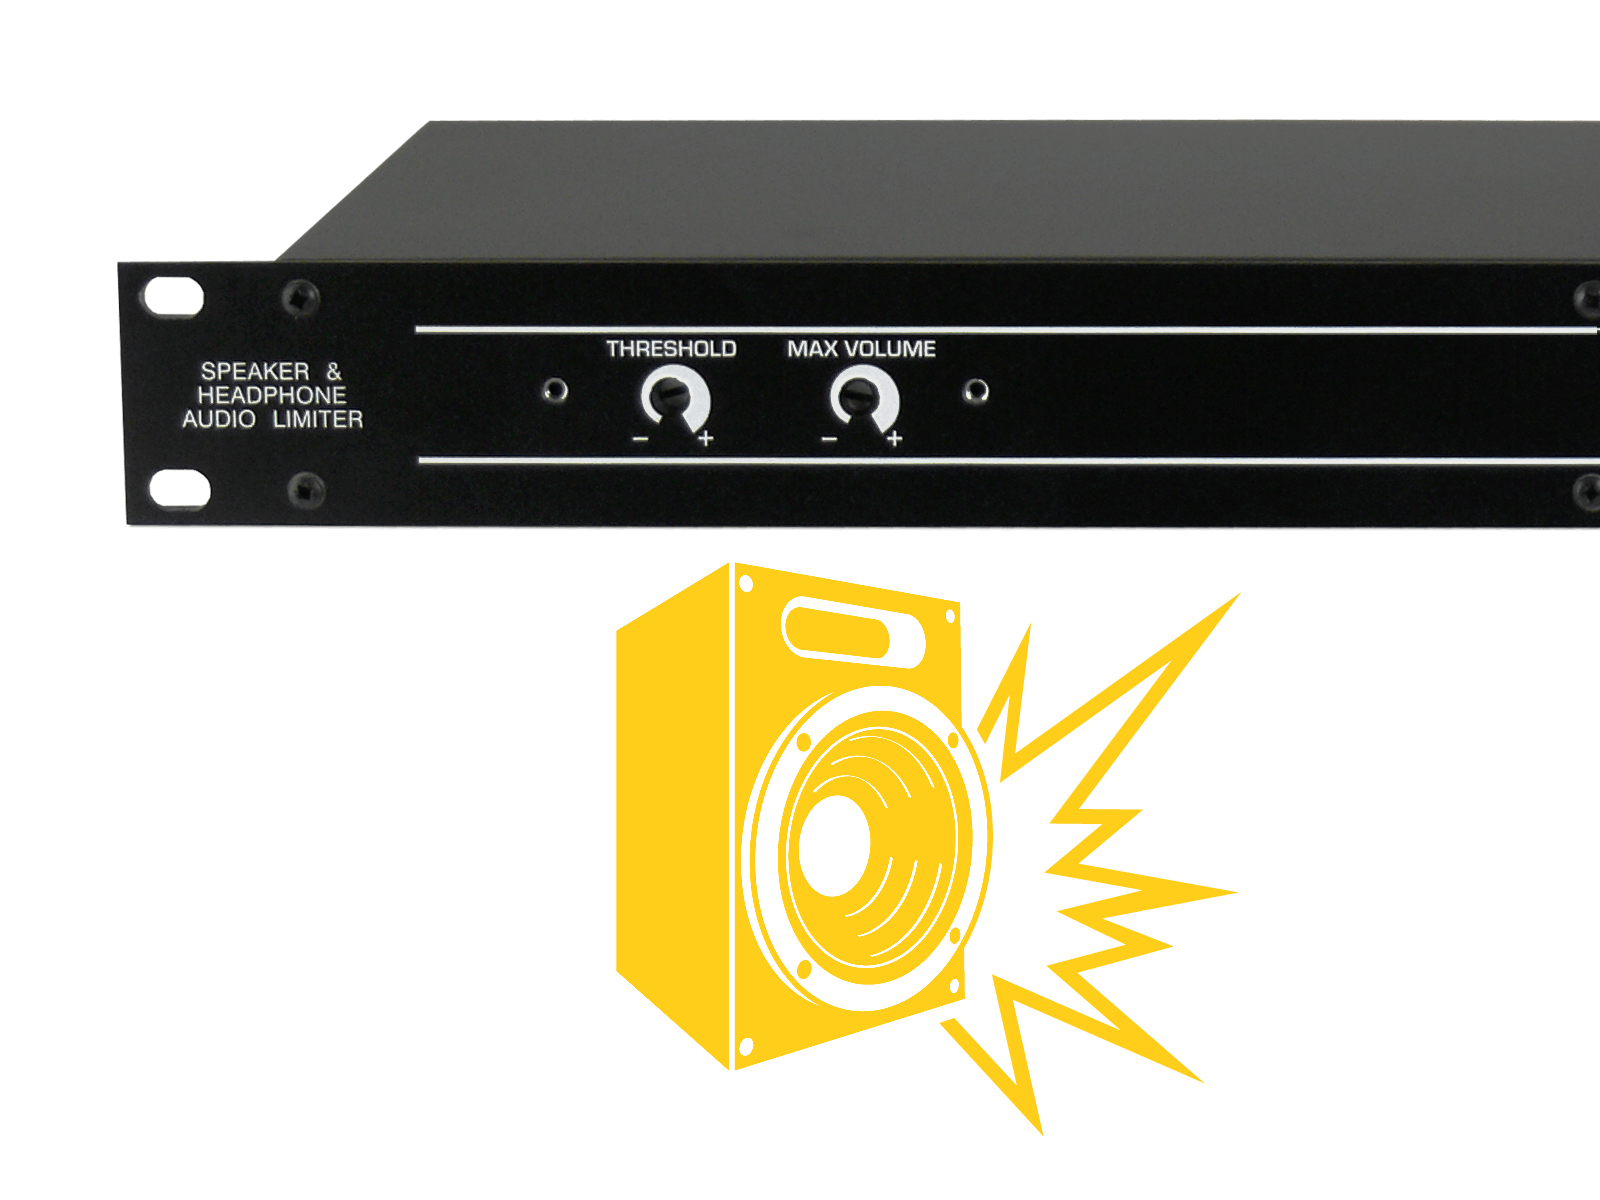 The SL22 controls with a graphic of the a blown up speaker below in yellow